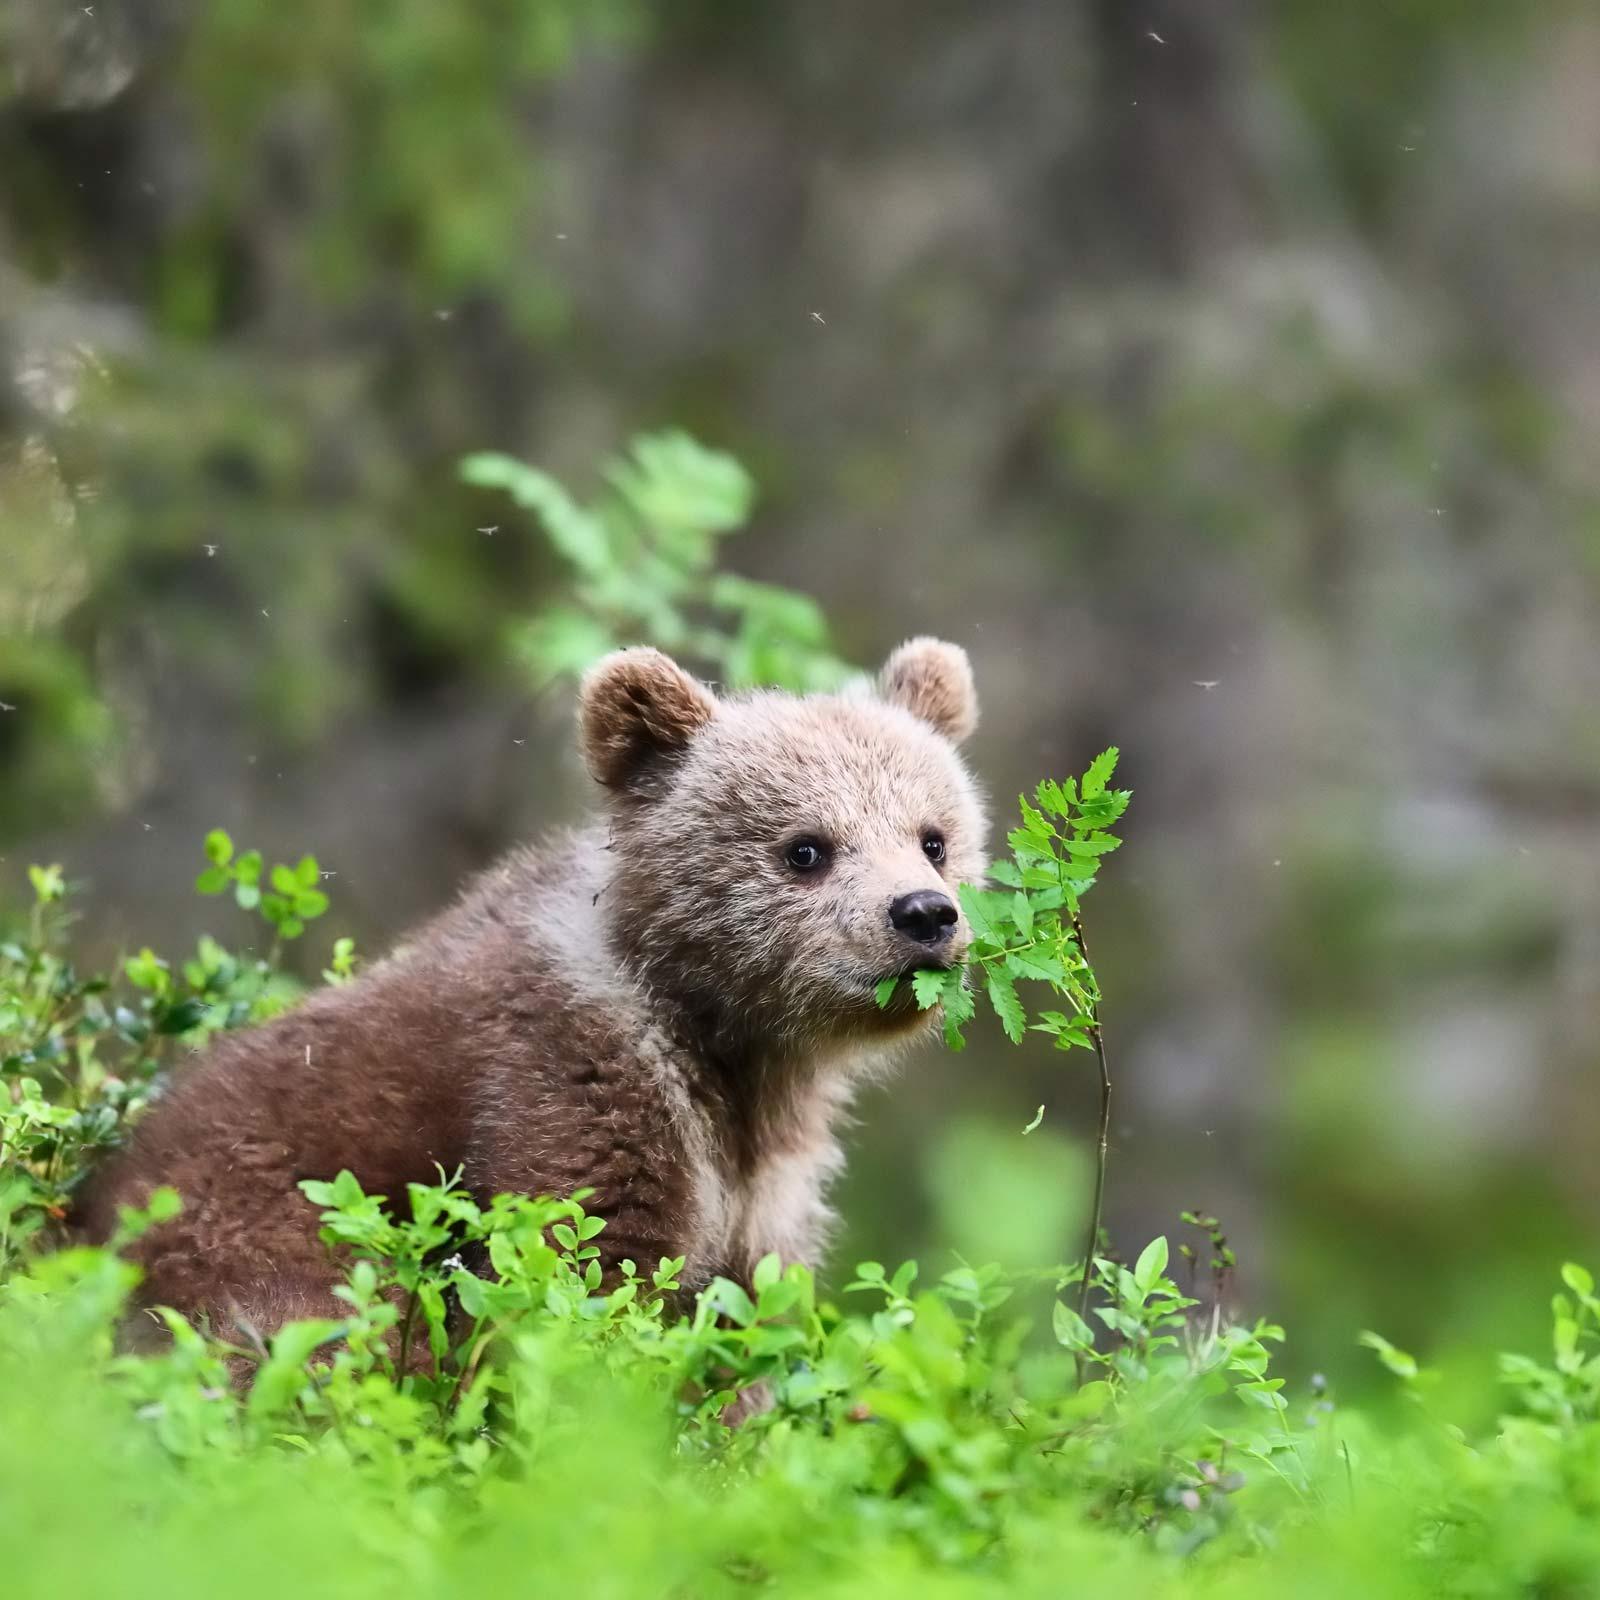 A bear cub sits in the undergrowth and eats leaves.